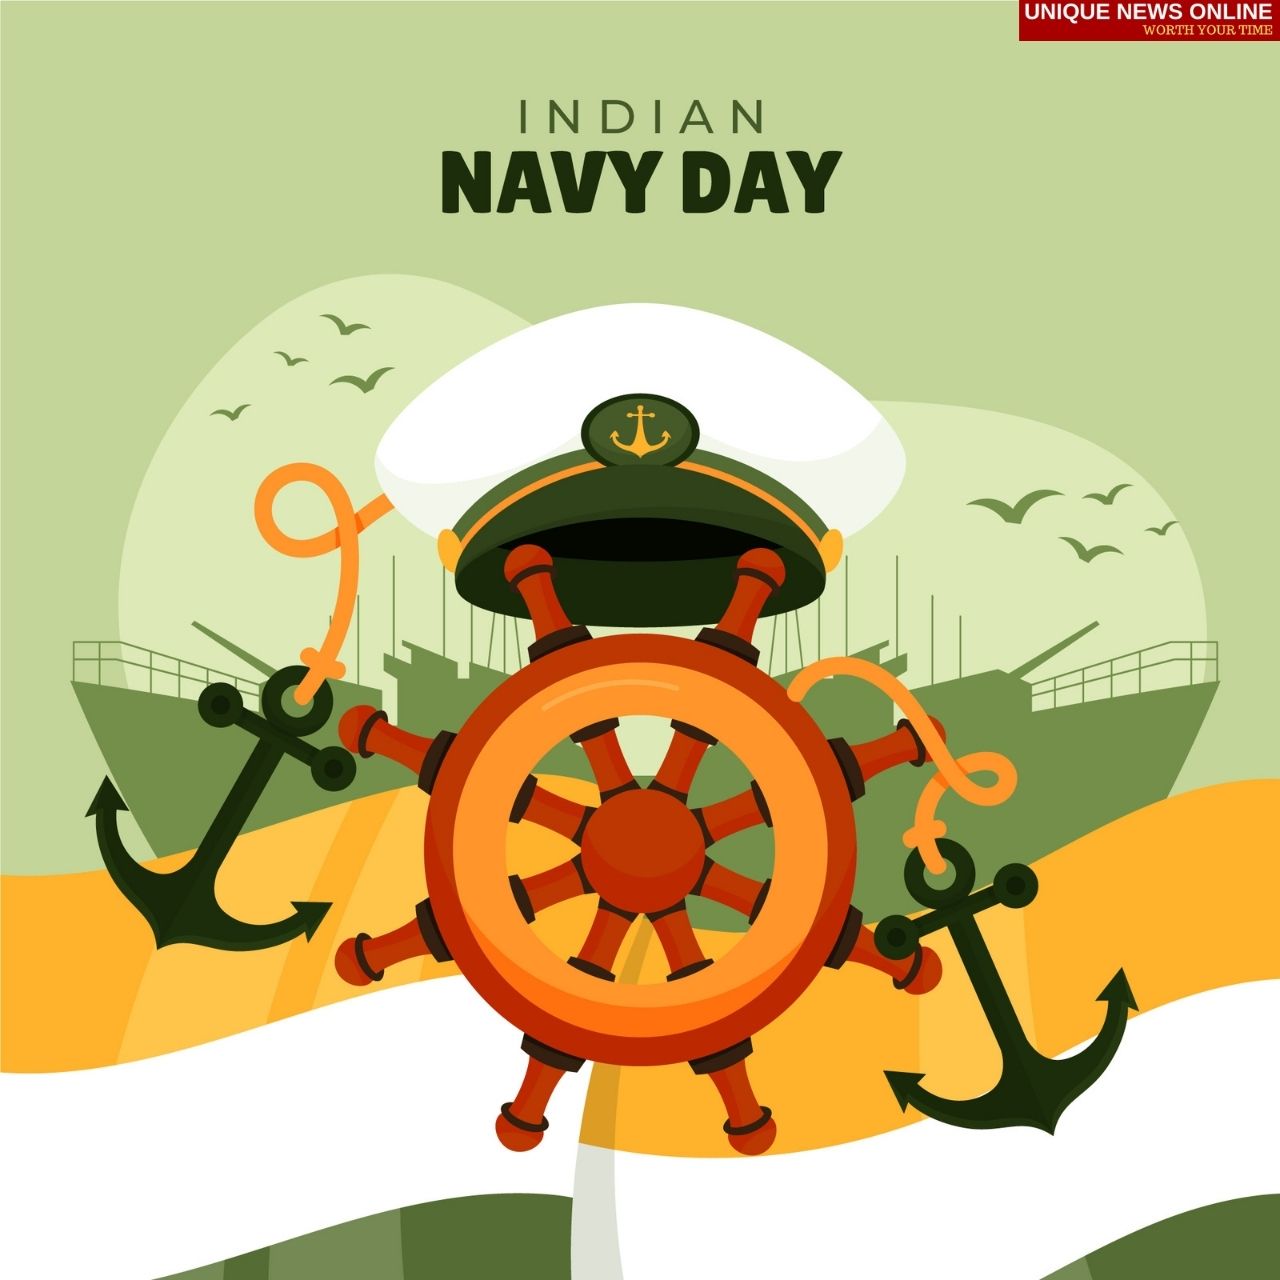 Indian Navy Day 2021 Date, Theme, History, Significance, Activities, and More